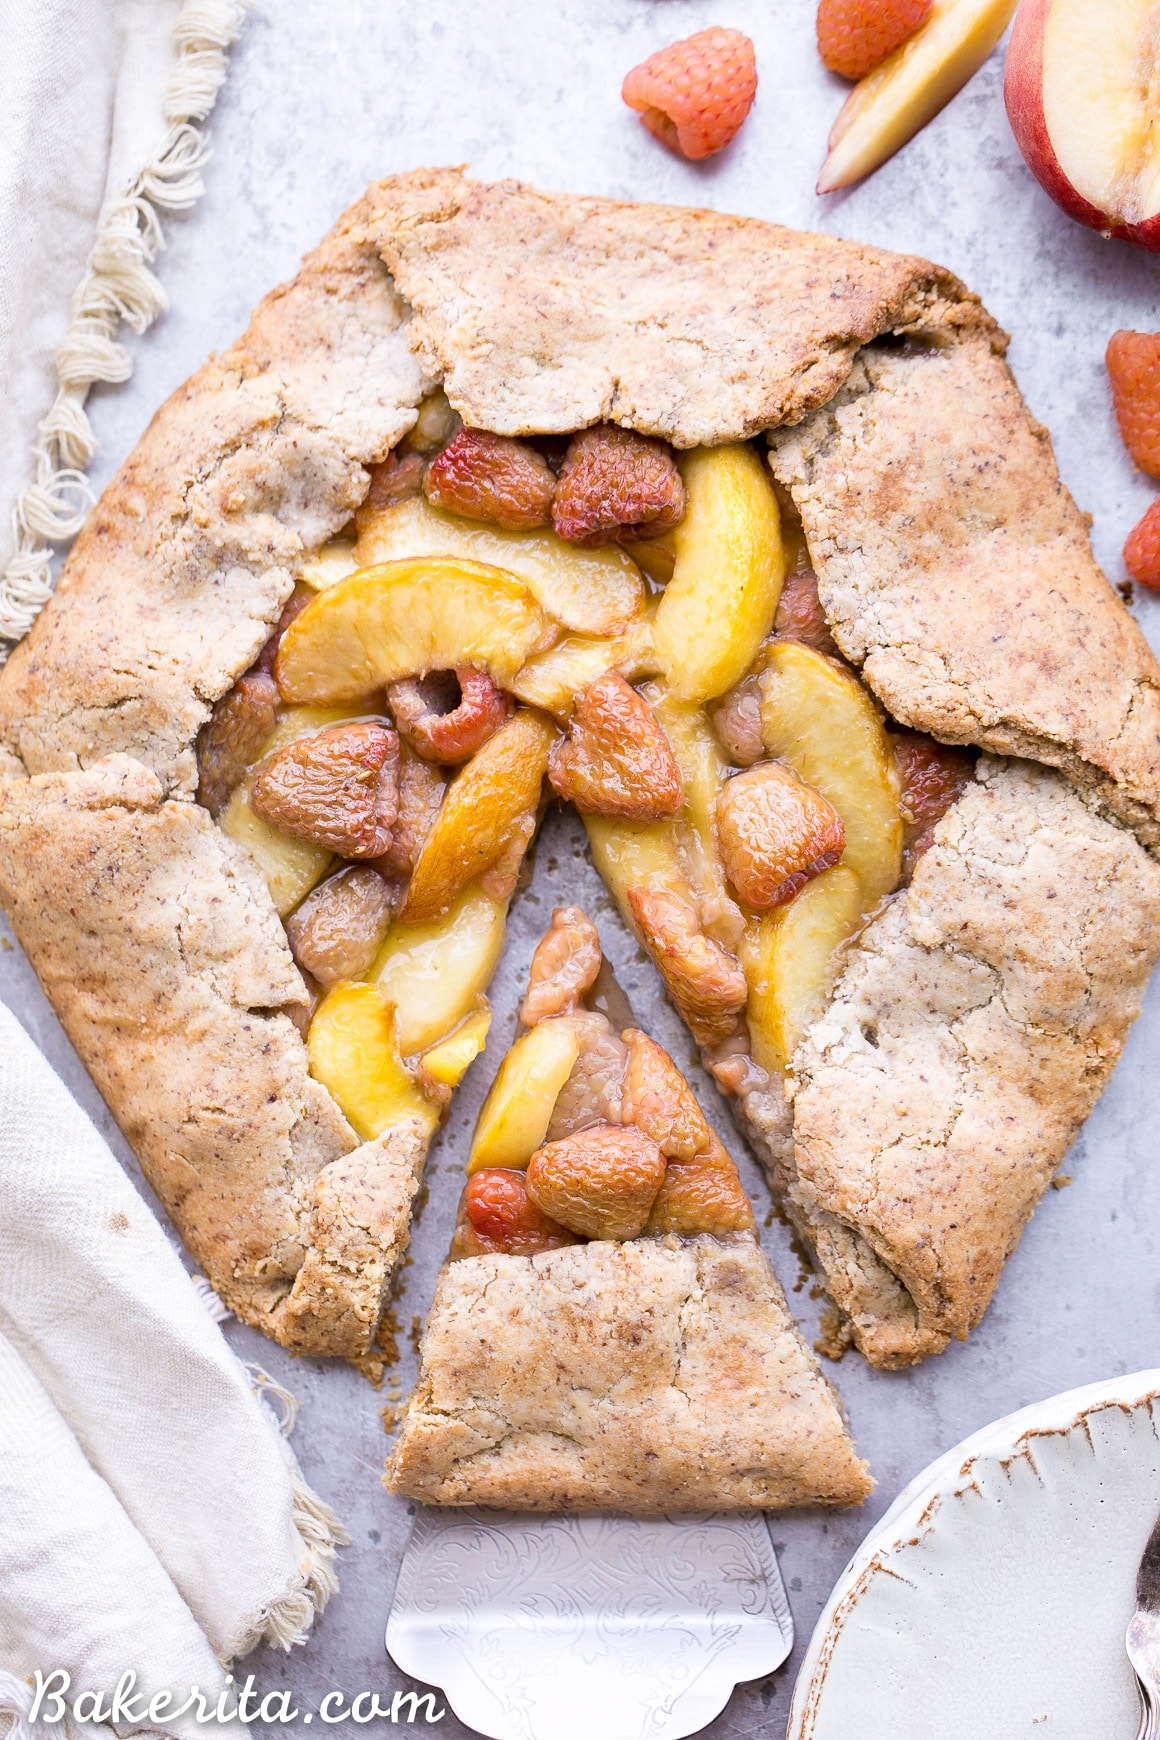 This Peach Raspberry Galette highlights two of summer's best fruits. The fresh peaches and raspberries are tucked into the flakiest paleo and vegan pie crust I've ever had!